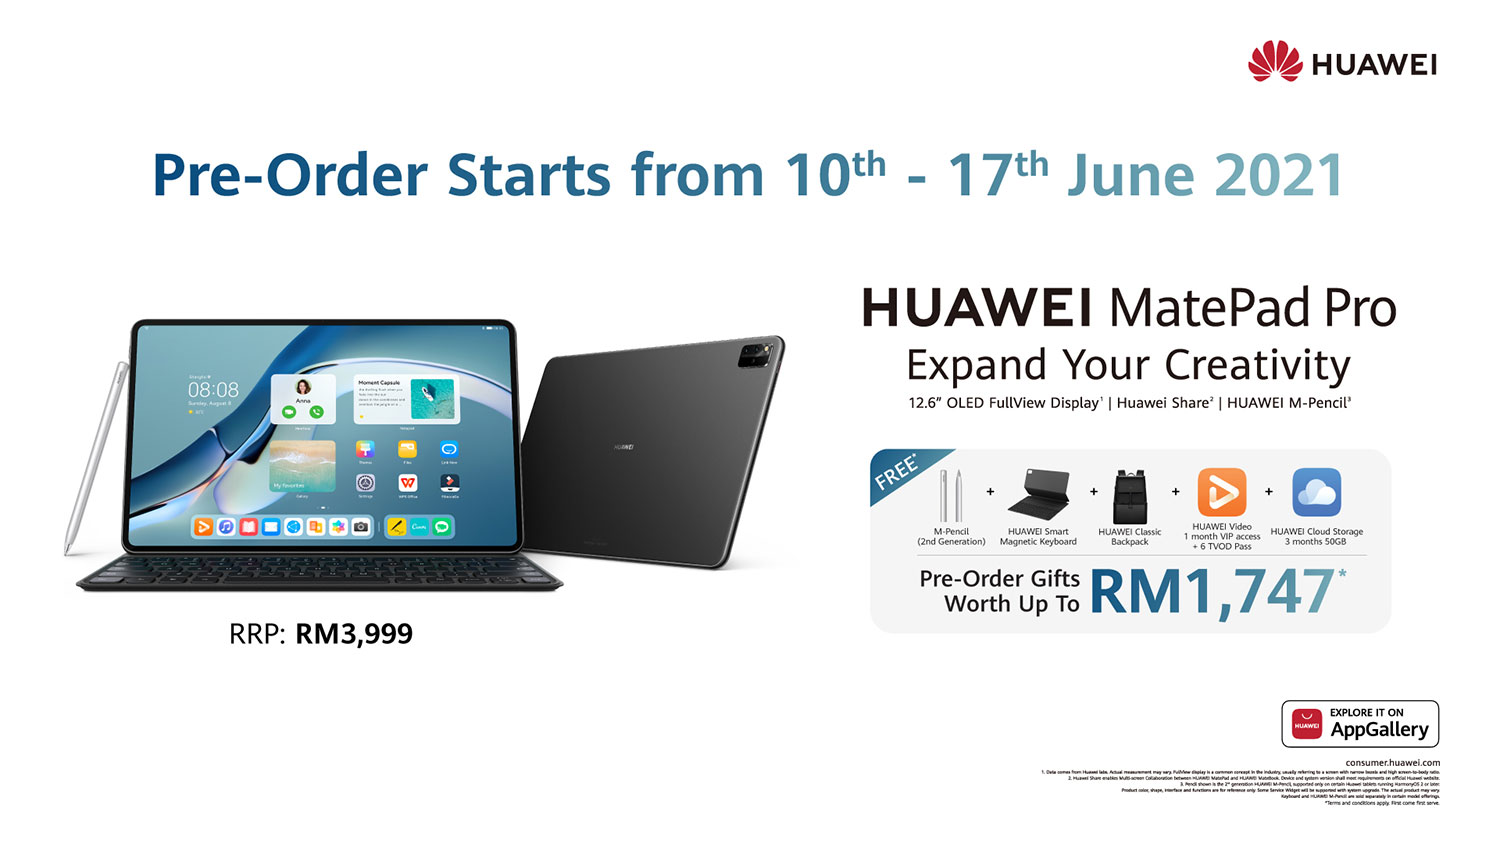 HUAWEI MatePad Pro 12.6-inch Now Available For Pre-Order